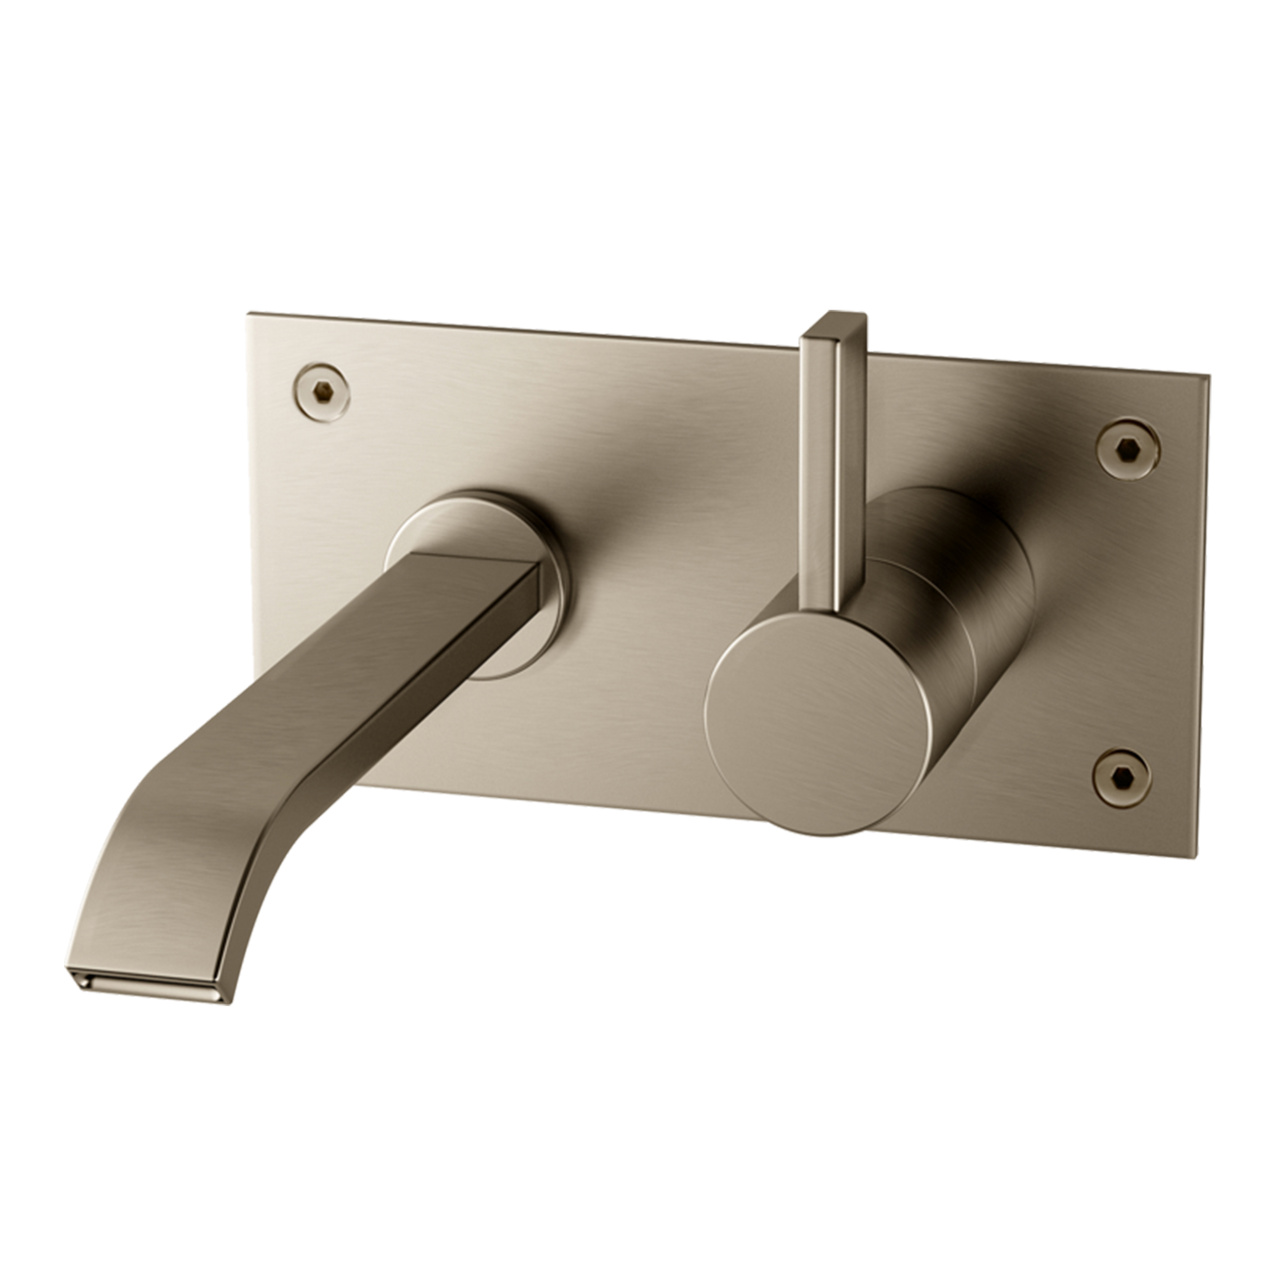 Tapwell Blandare ARM006 Brushed Nickel